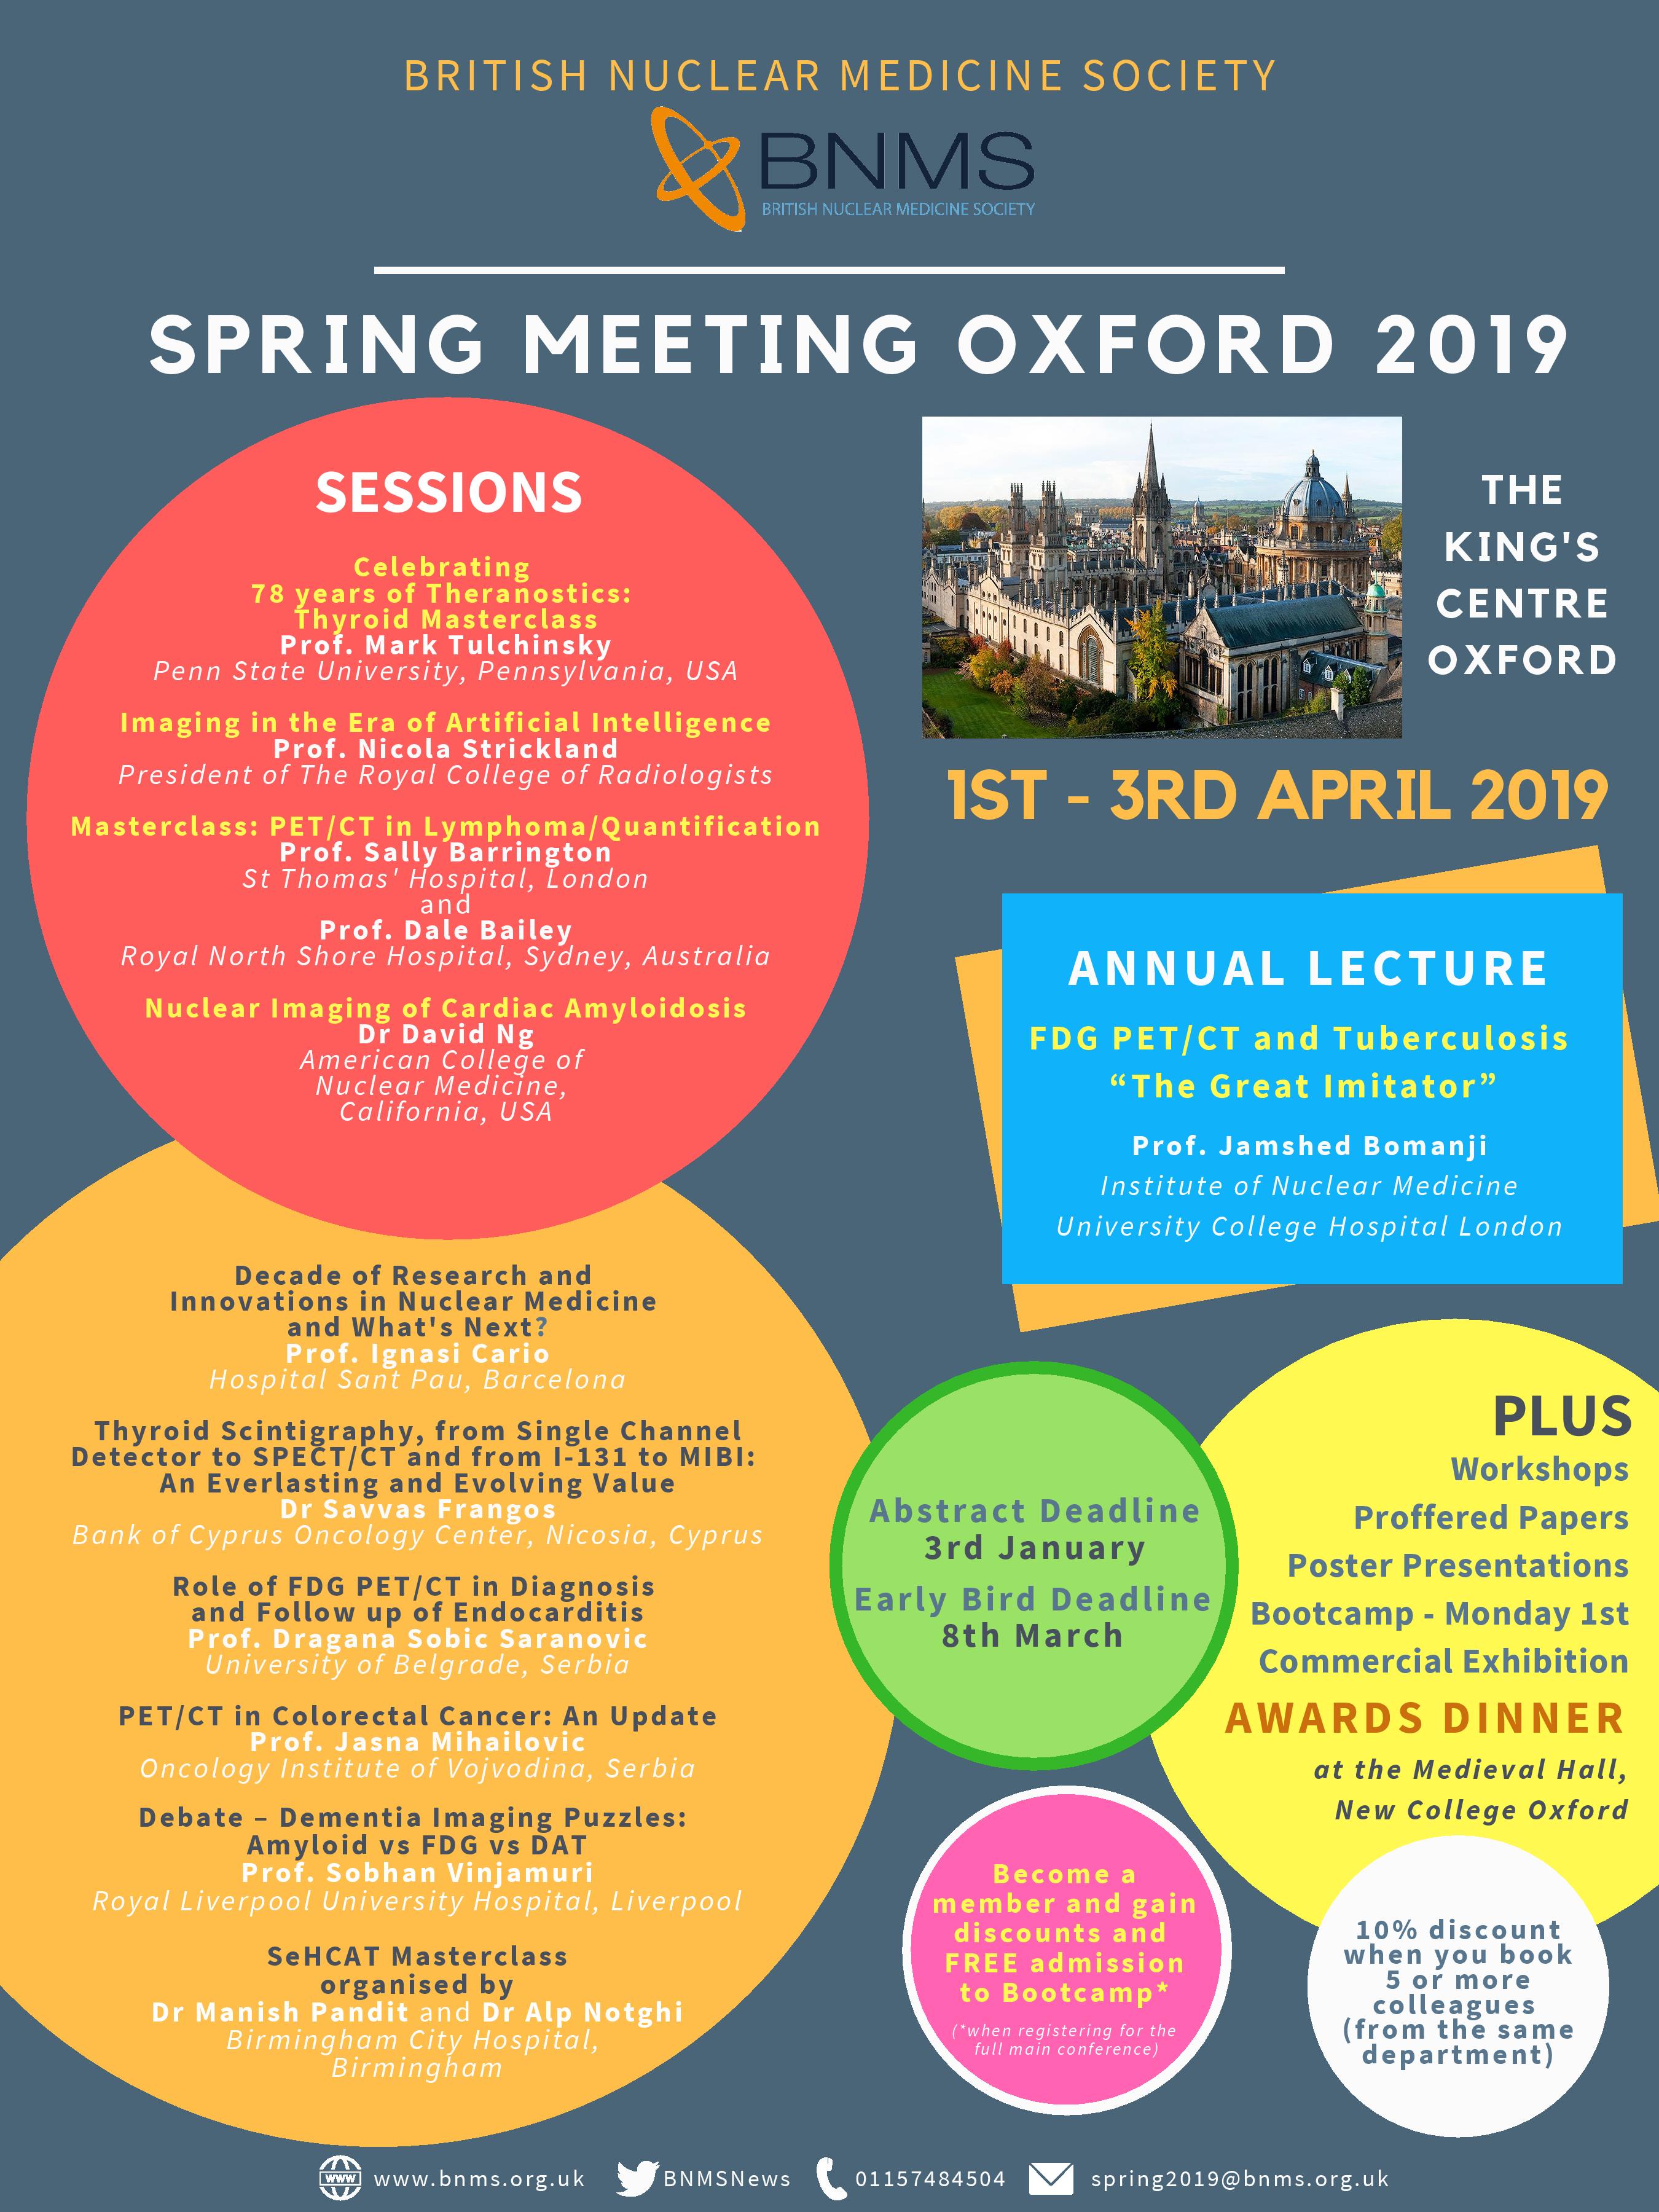 British Nuclear Medicine Society Spring Meeting 2019 (BNMS 2019)